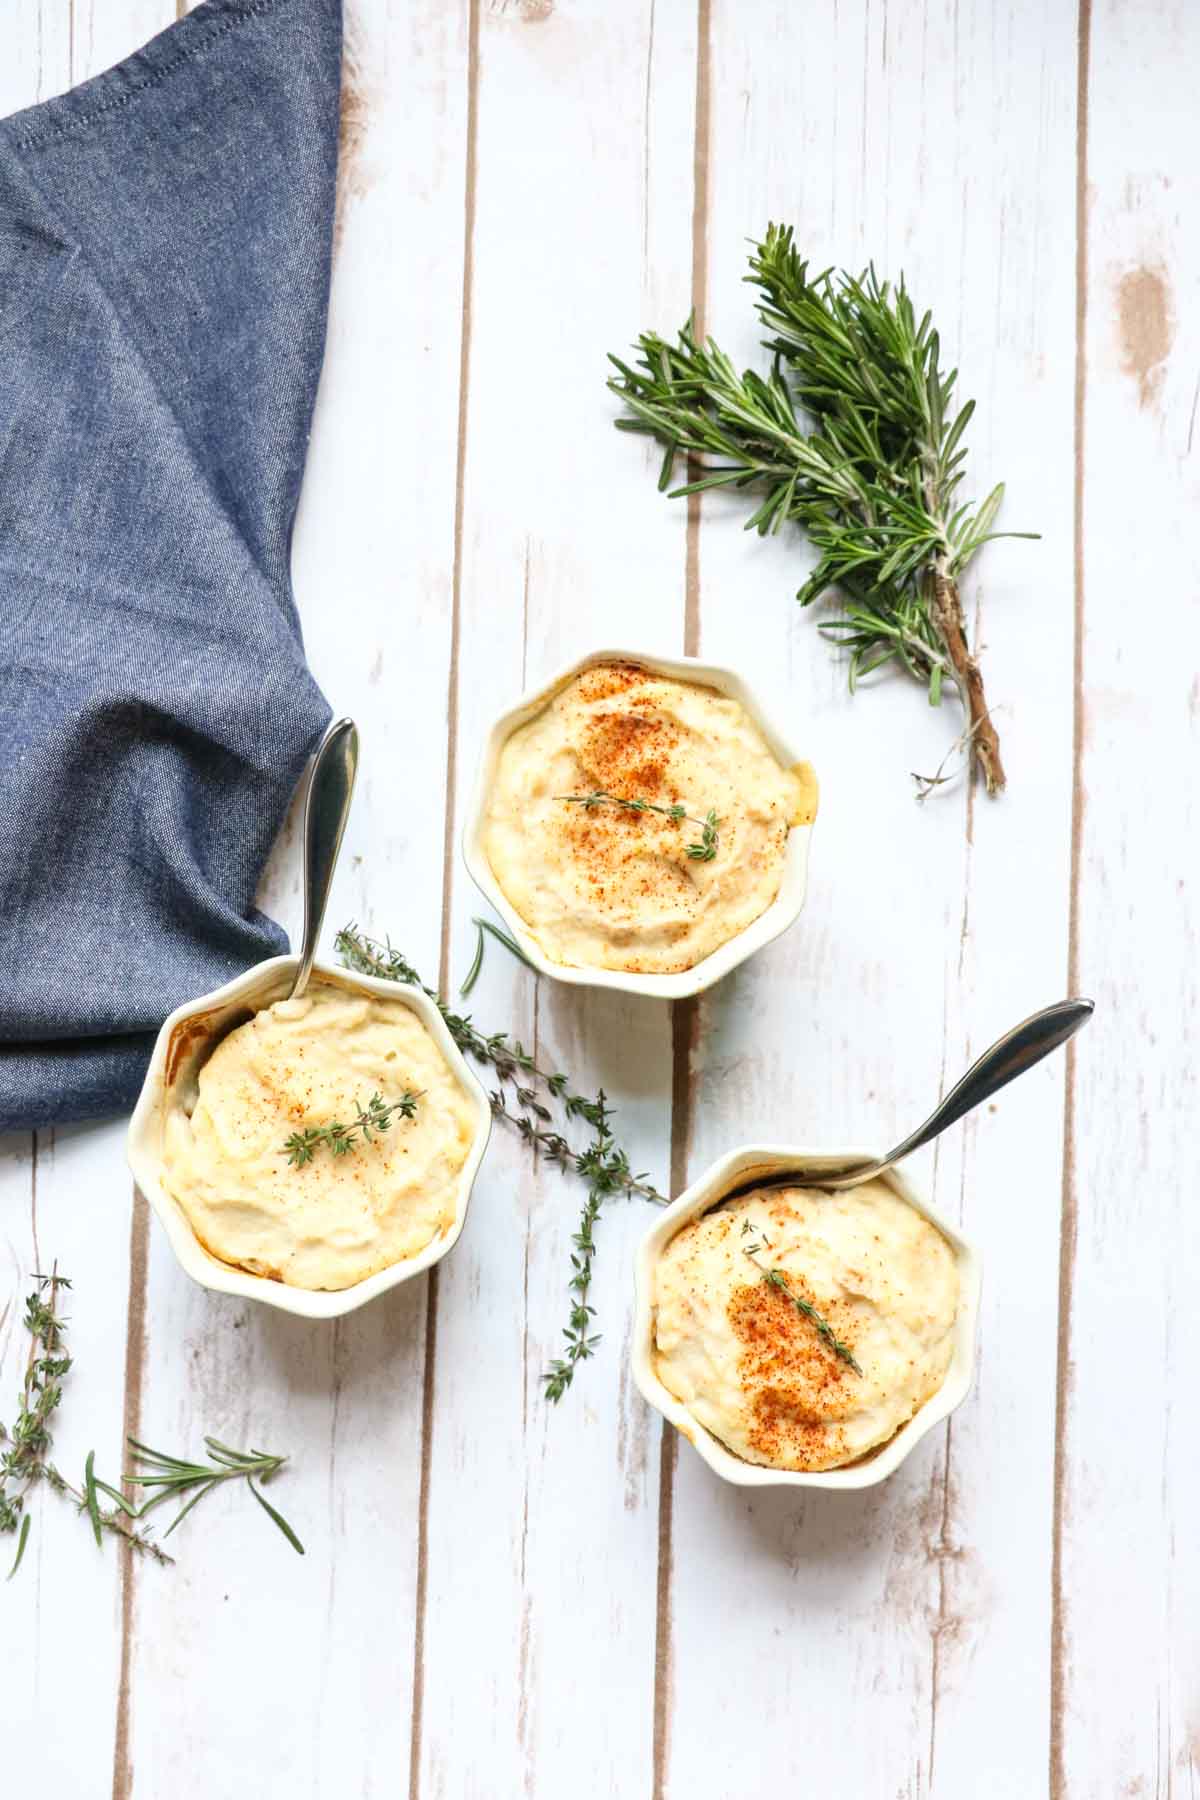 Vegan lentil shephards pie with mashed cauliflower. Next level comfort food, slowly simmered lentils and leeks topped with fragrant rosemary mashed cauliflower. Vegan, gluten-free, and totally delicious |abraskitchen.com